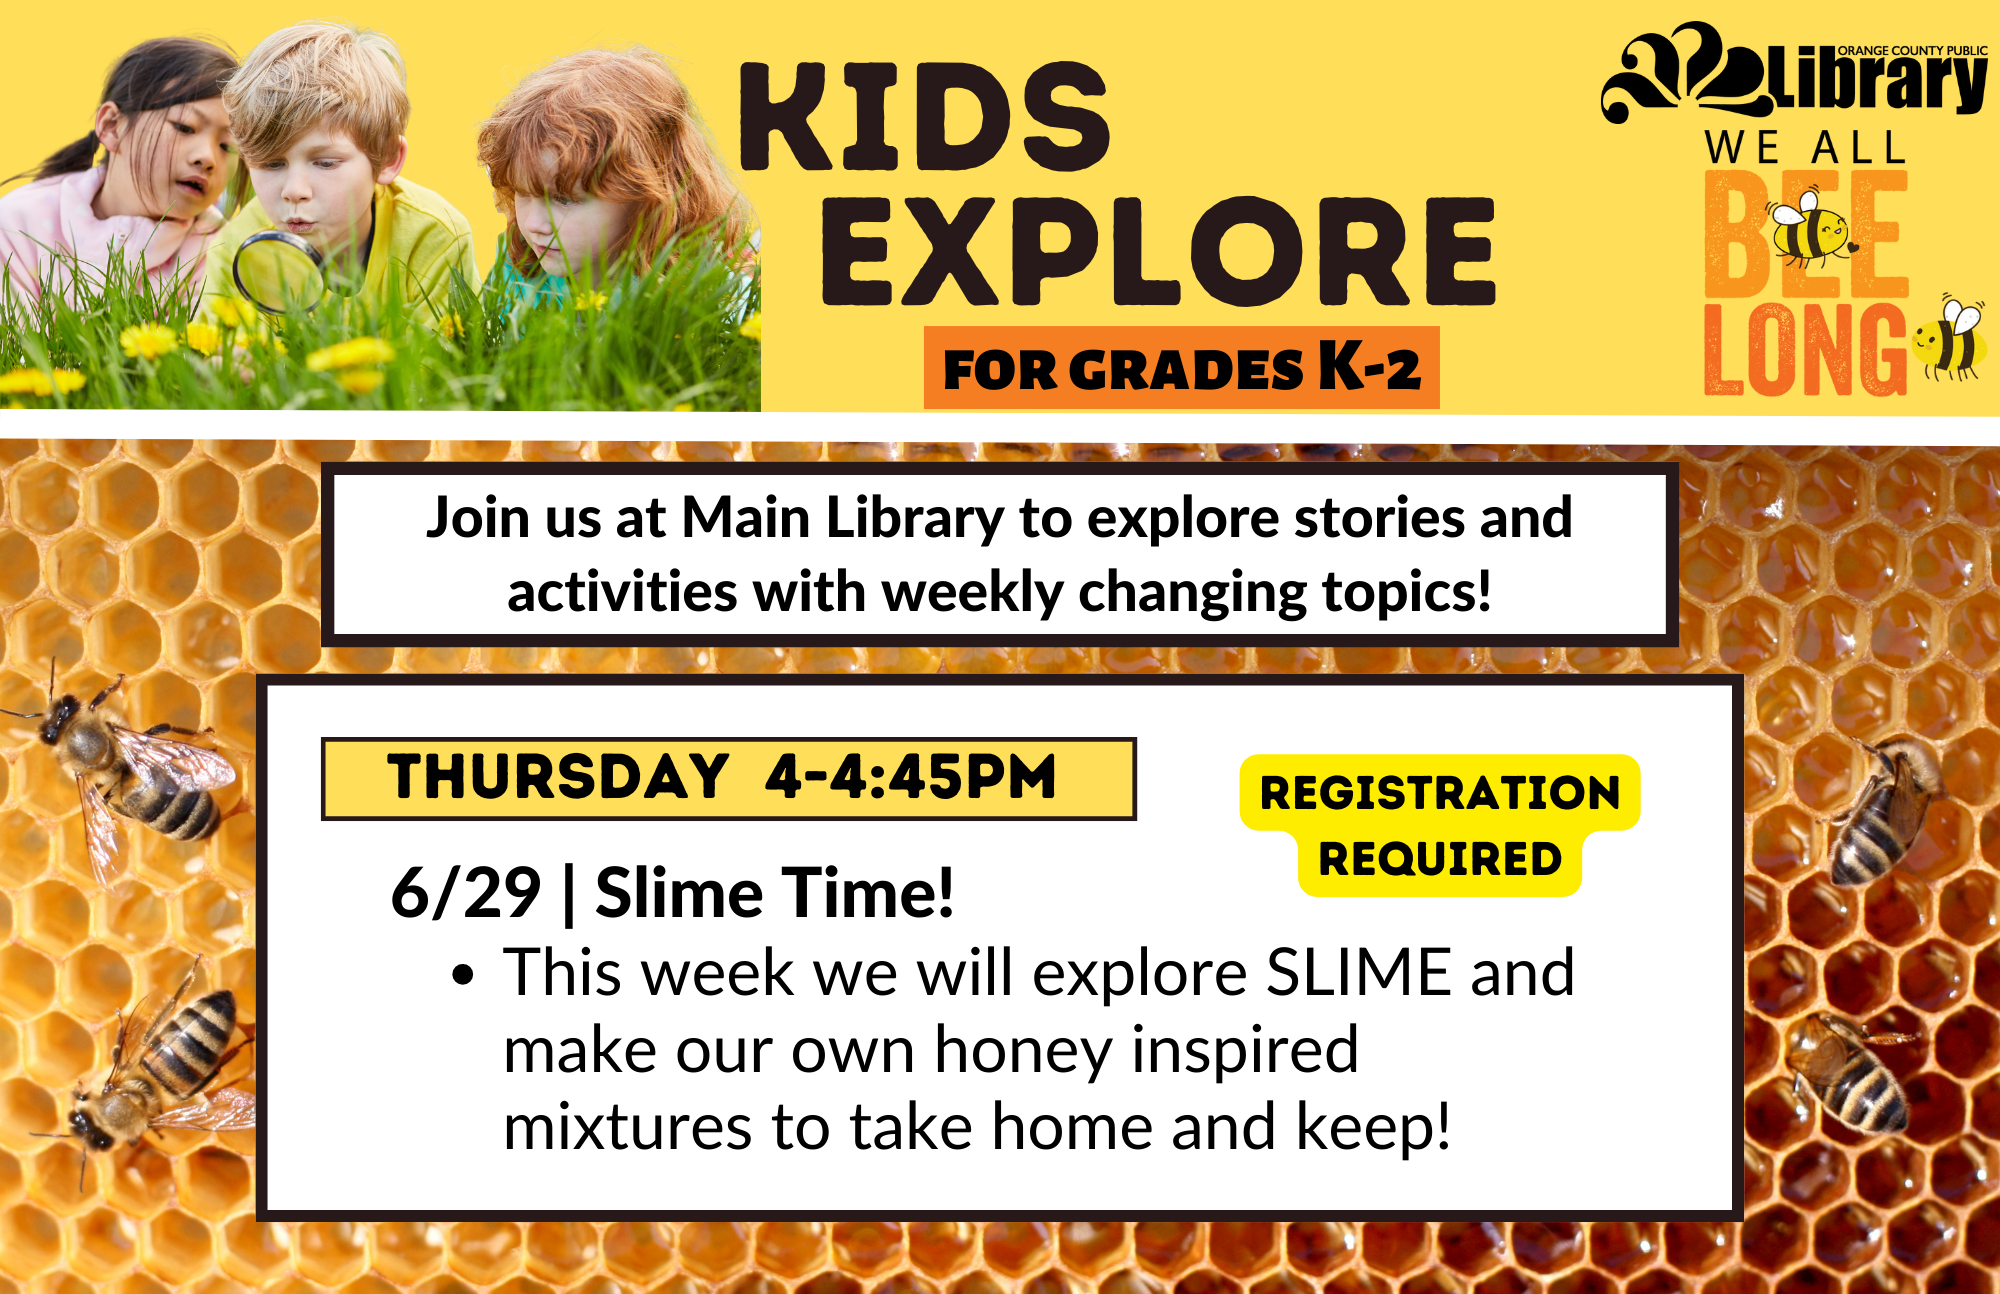 This program is for kids finishing grades K-2.  This week we will explore SLIME and make our own honey inspired mixtures to take home and keep.  Registration is required.  Register online or call 919-245-2532.